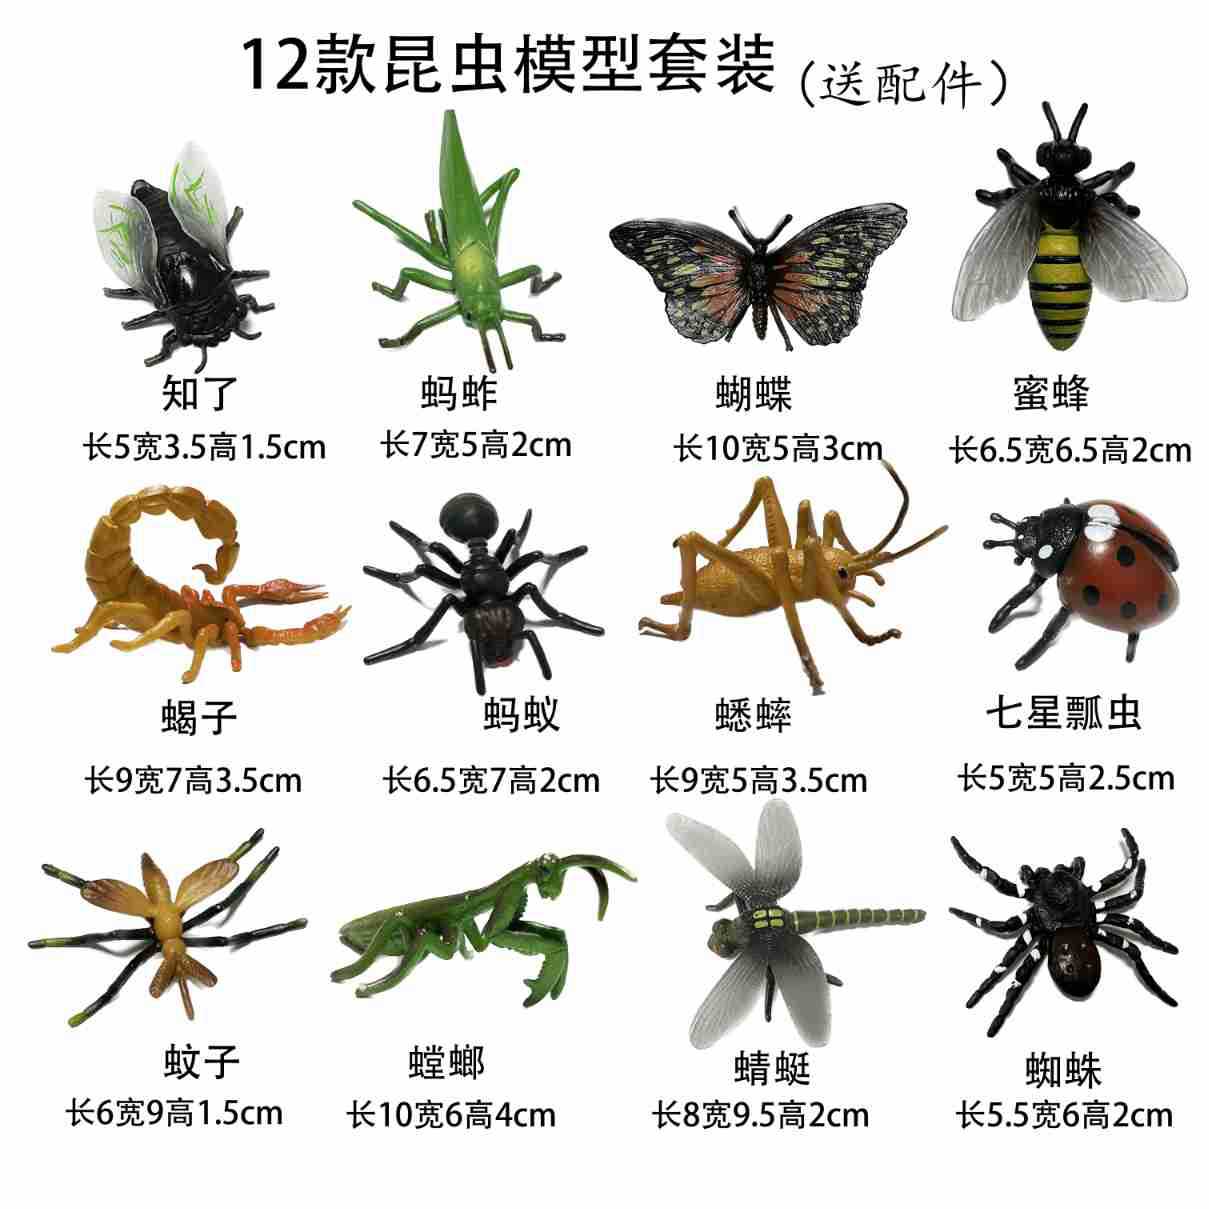 Cross-Border Children's Real Insect Toy Animal Model Hoppergrass Butterfly Scorpion Spider Ant Teaching Observation Ornaments